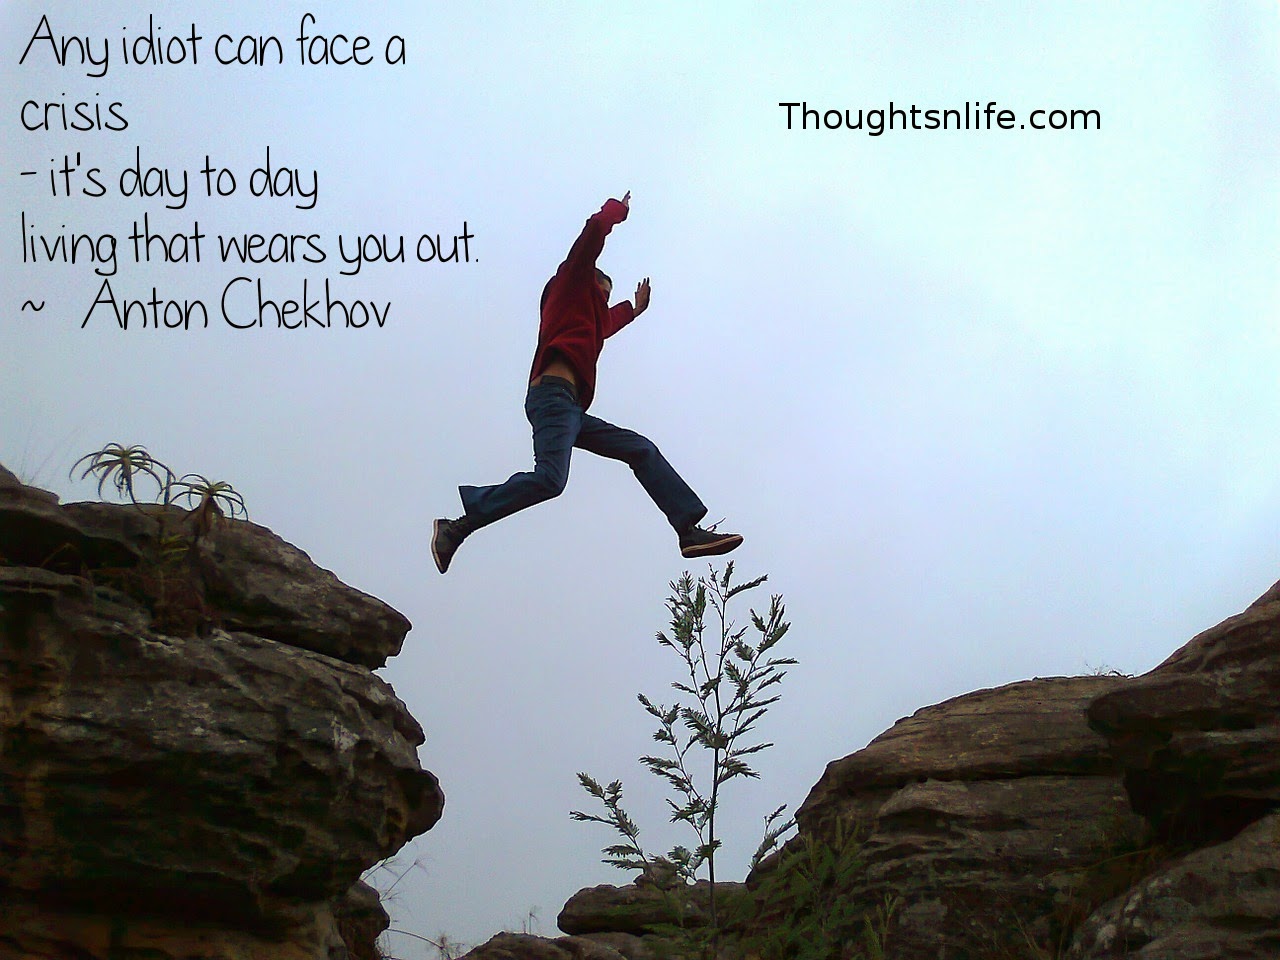 Thoughtsnlife.com: Any idiot can face a crisis - it's day to day living that wears you out. ~   Anton Chekhov